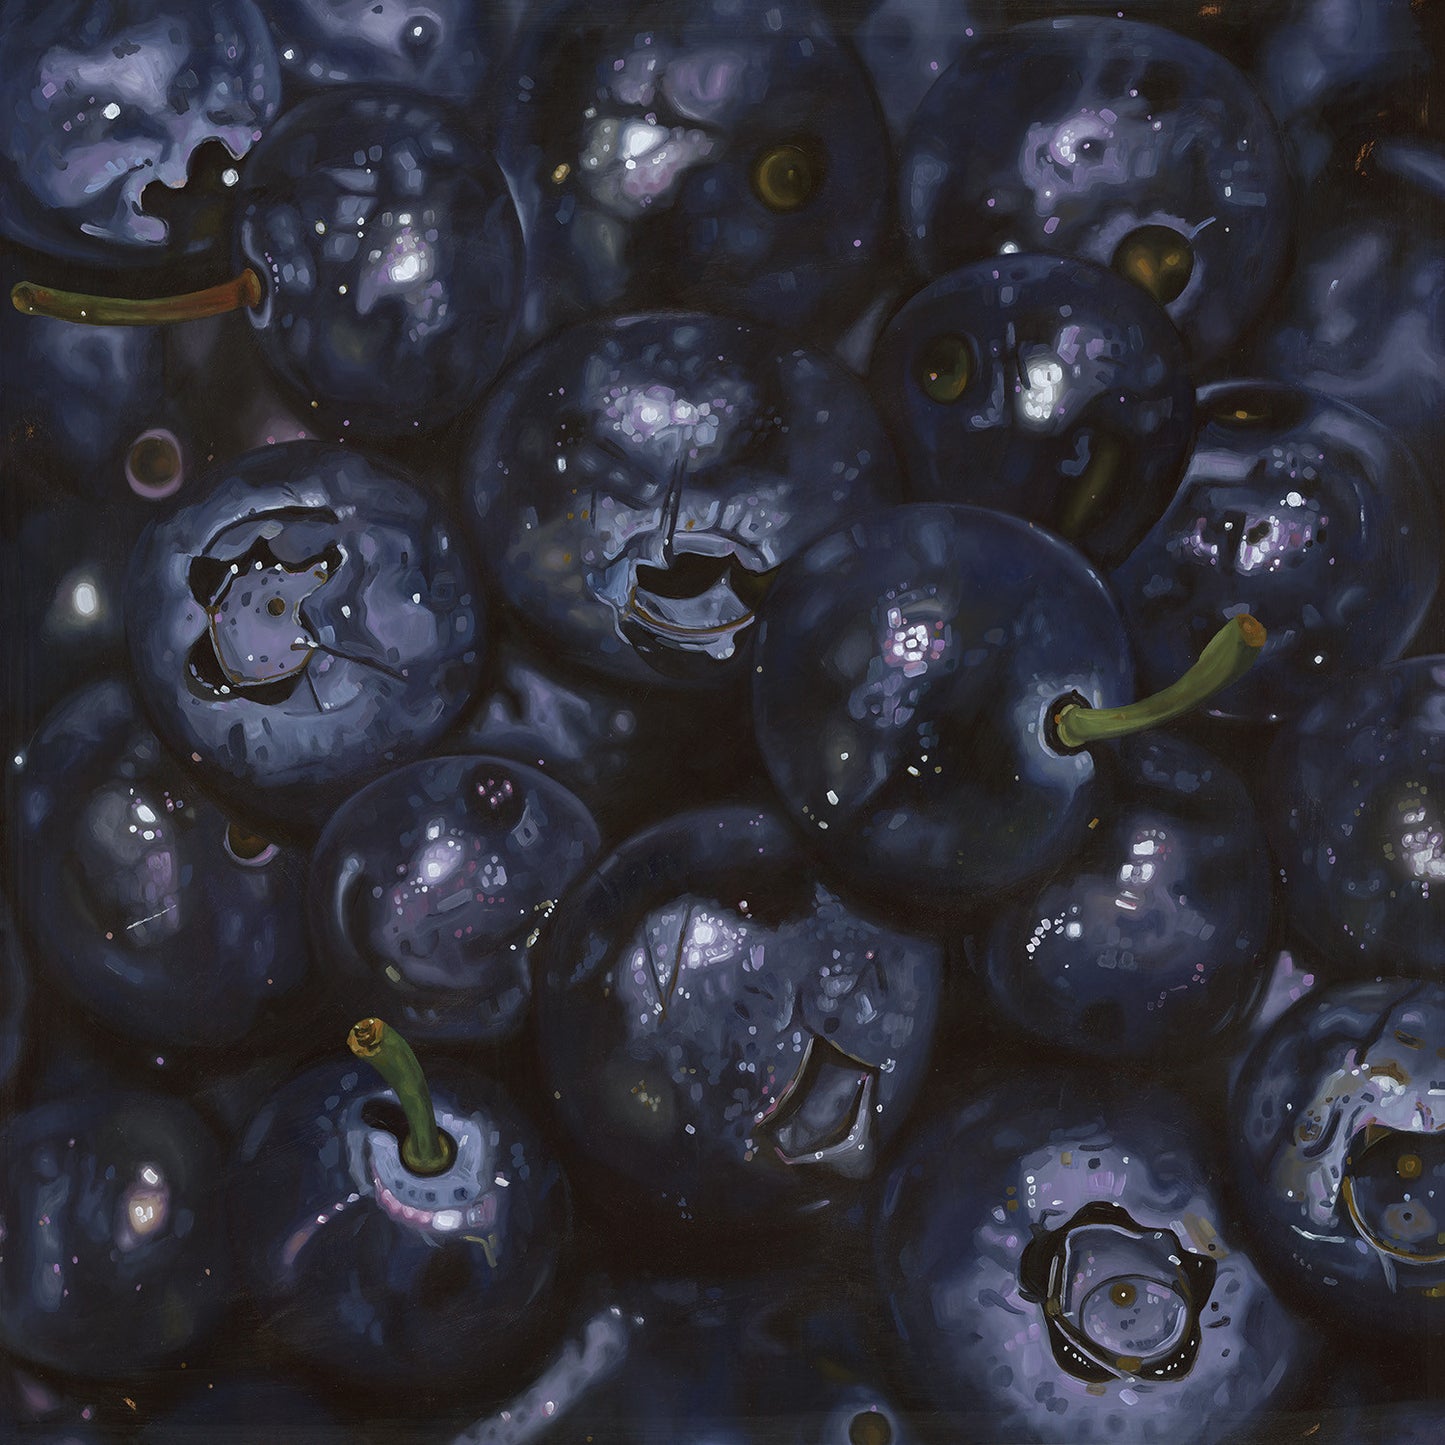 The original painting “Blueberries" by Hannah Kilby from Hannah Michelle Studios.